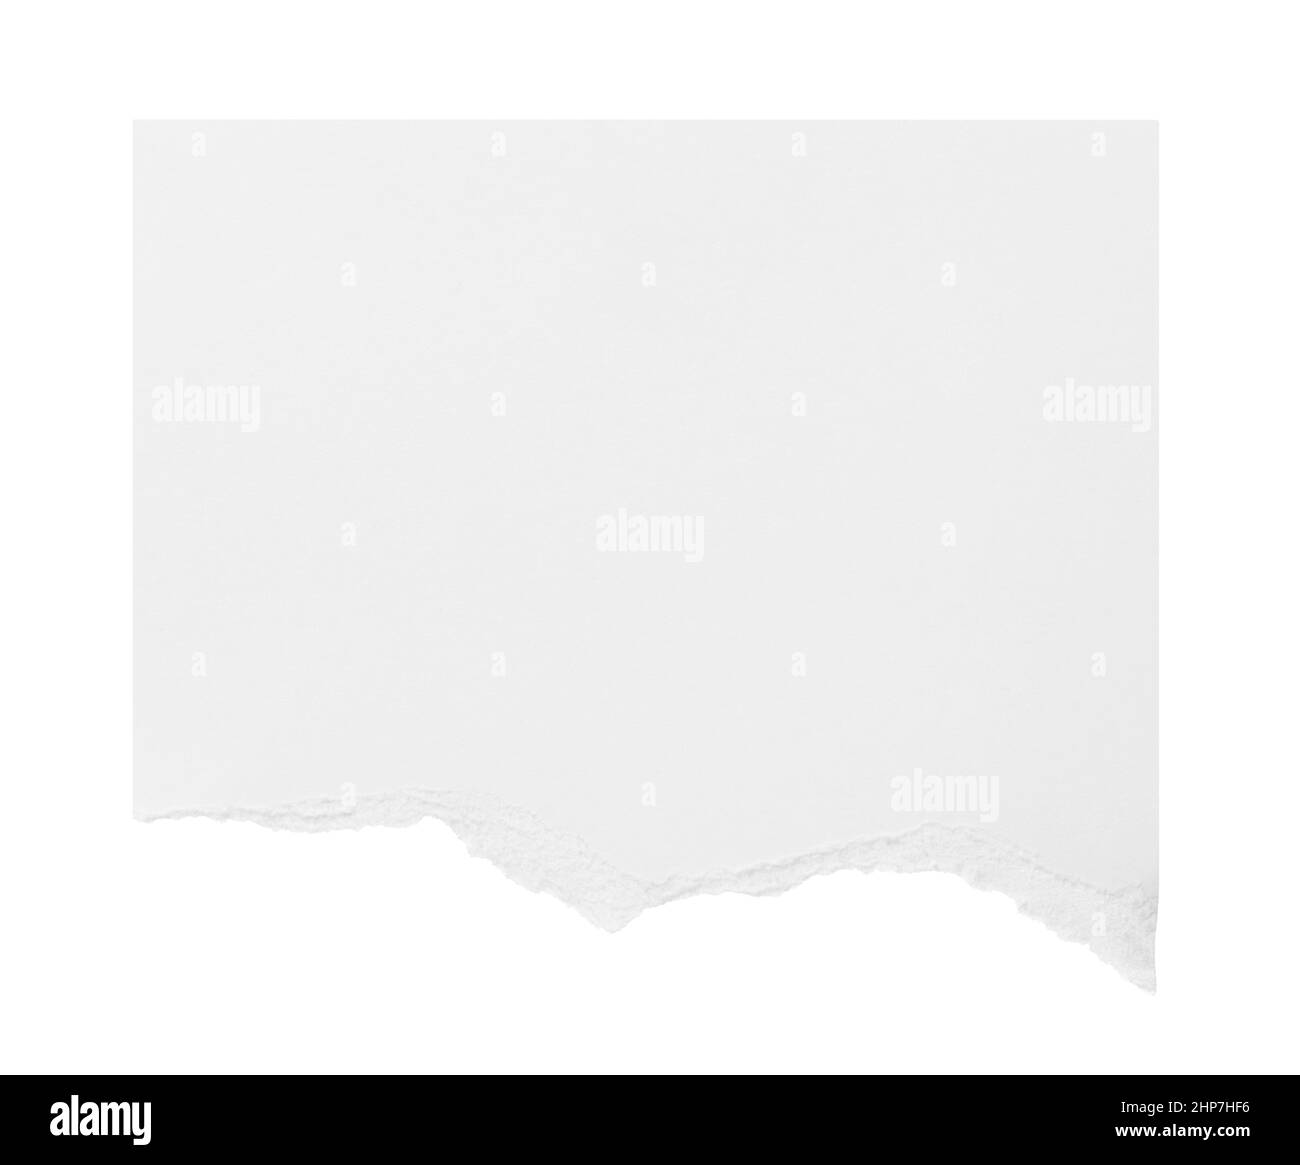 white paper ripped open Stock Photo - Alamy